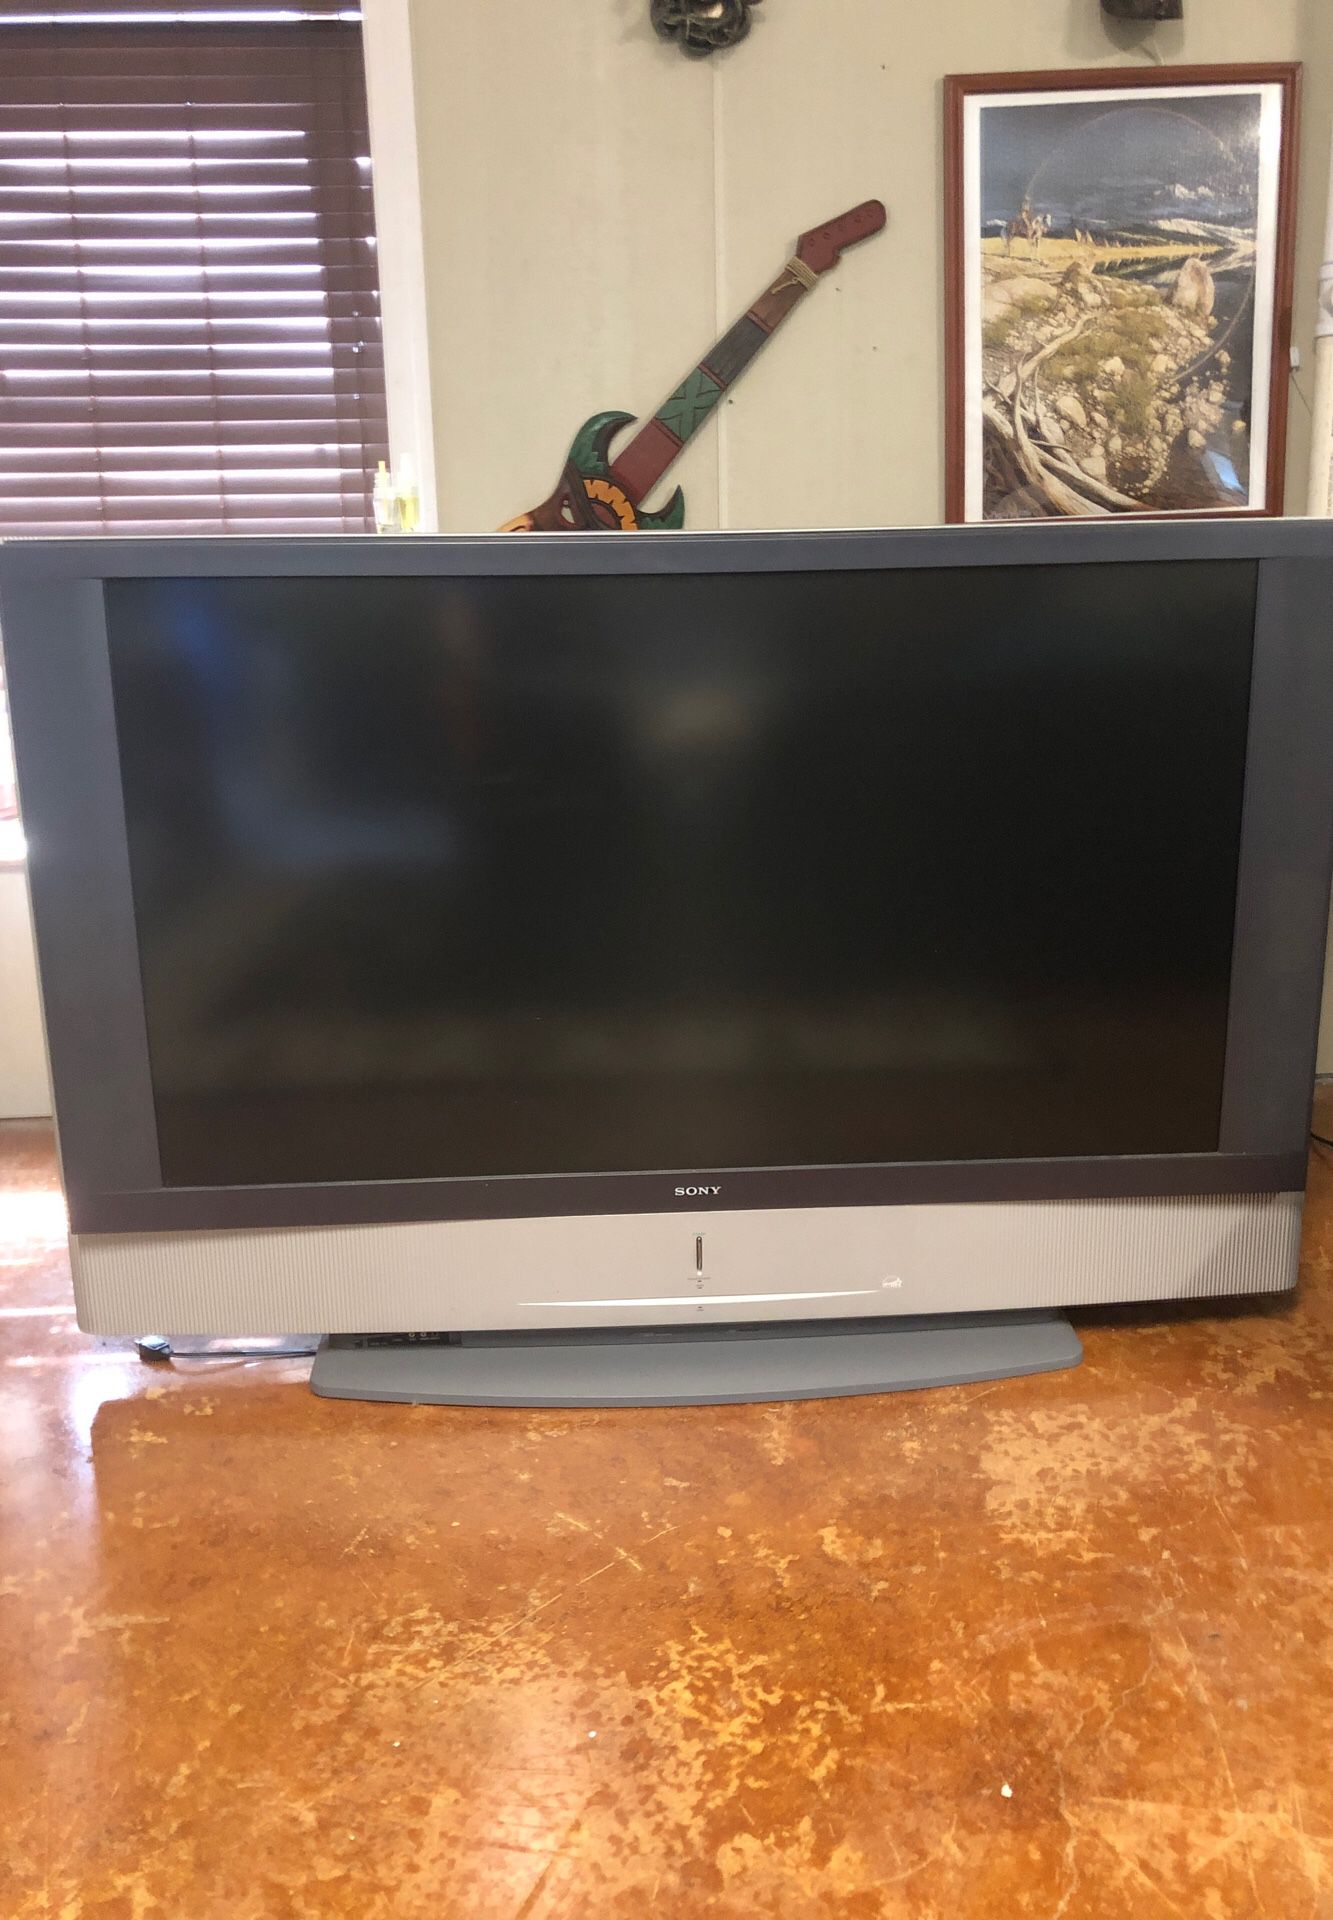 60’’ Sony tv, two 20 inch TVs: a Sylvania with a build in DVD player and Panasonic with a VHS player, and a 25 inch Sanyo tv. Also included is the tv